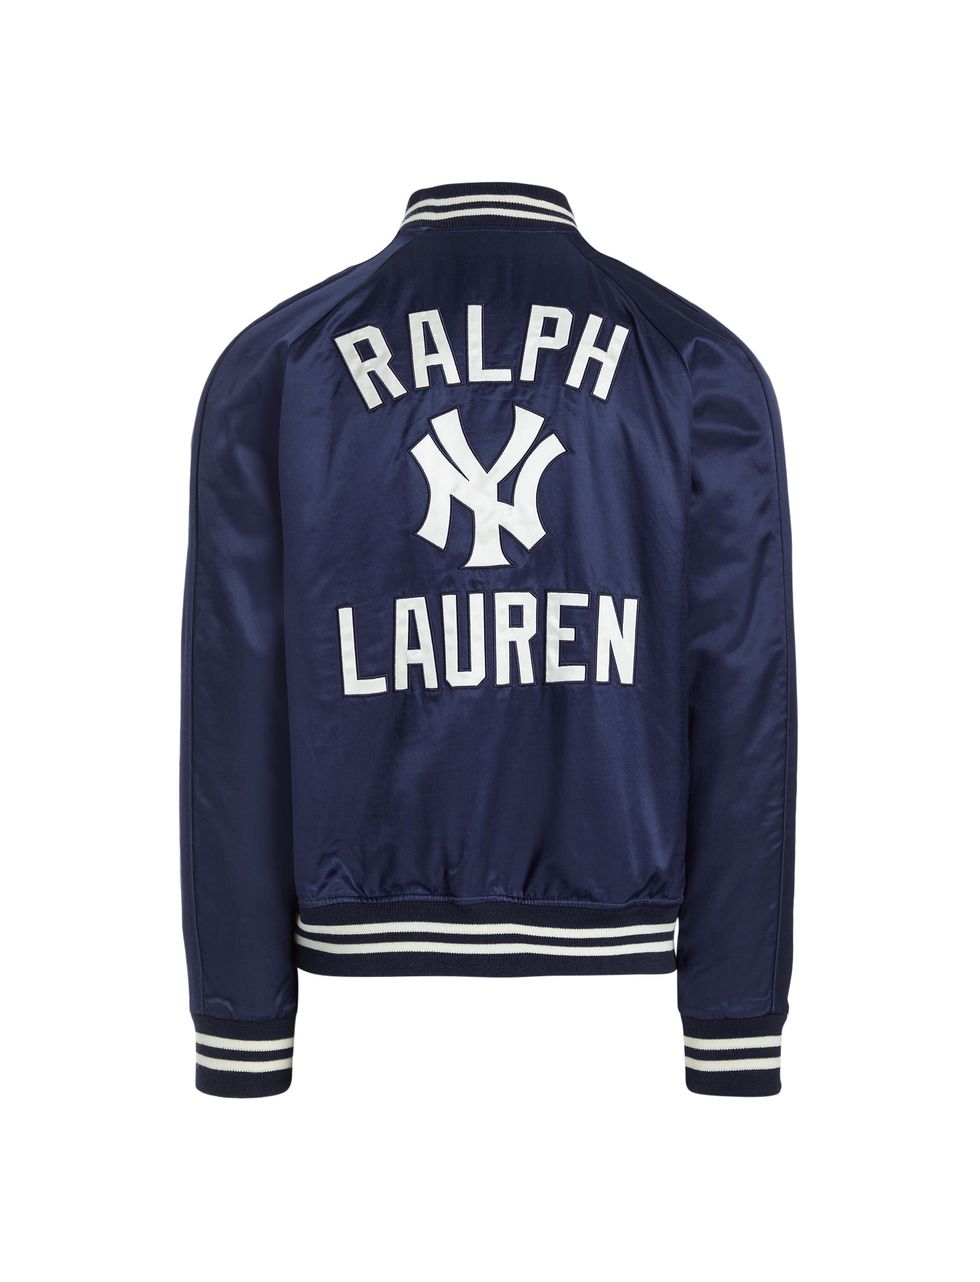 POLO RALPH LAUREN Men's MLB Collection Yankees NY Classic Fit